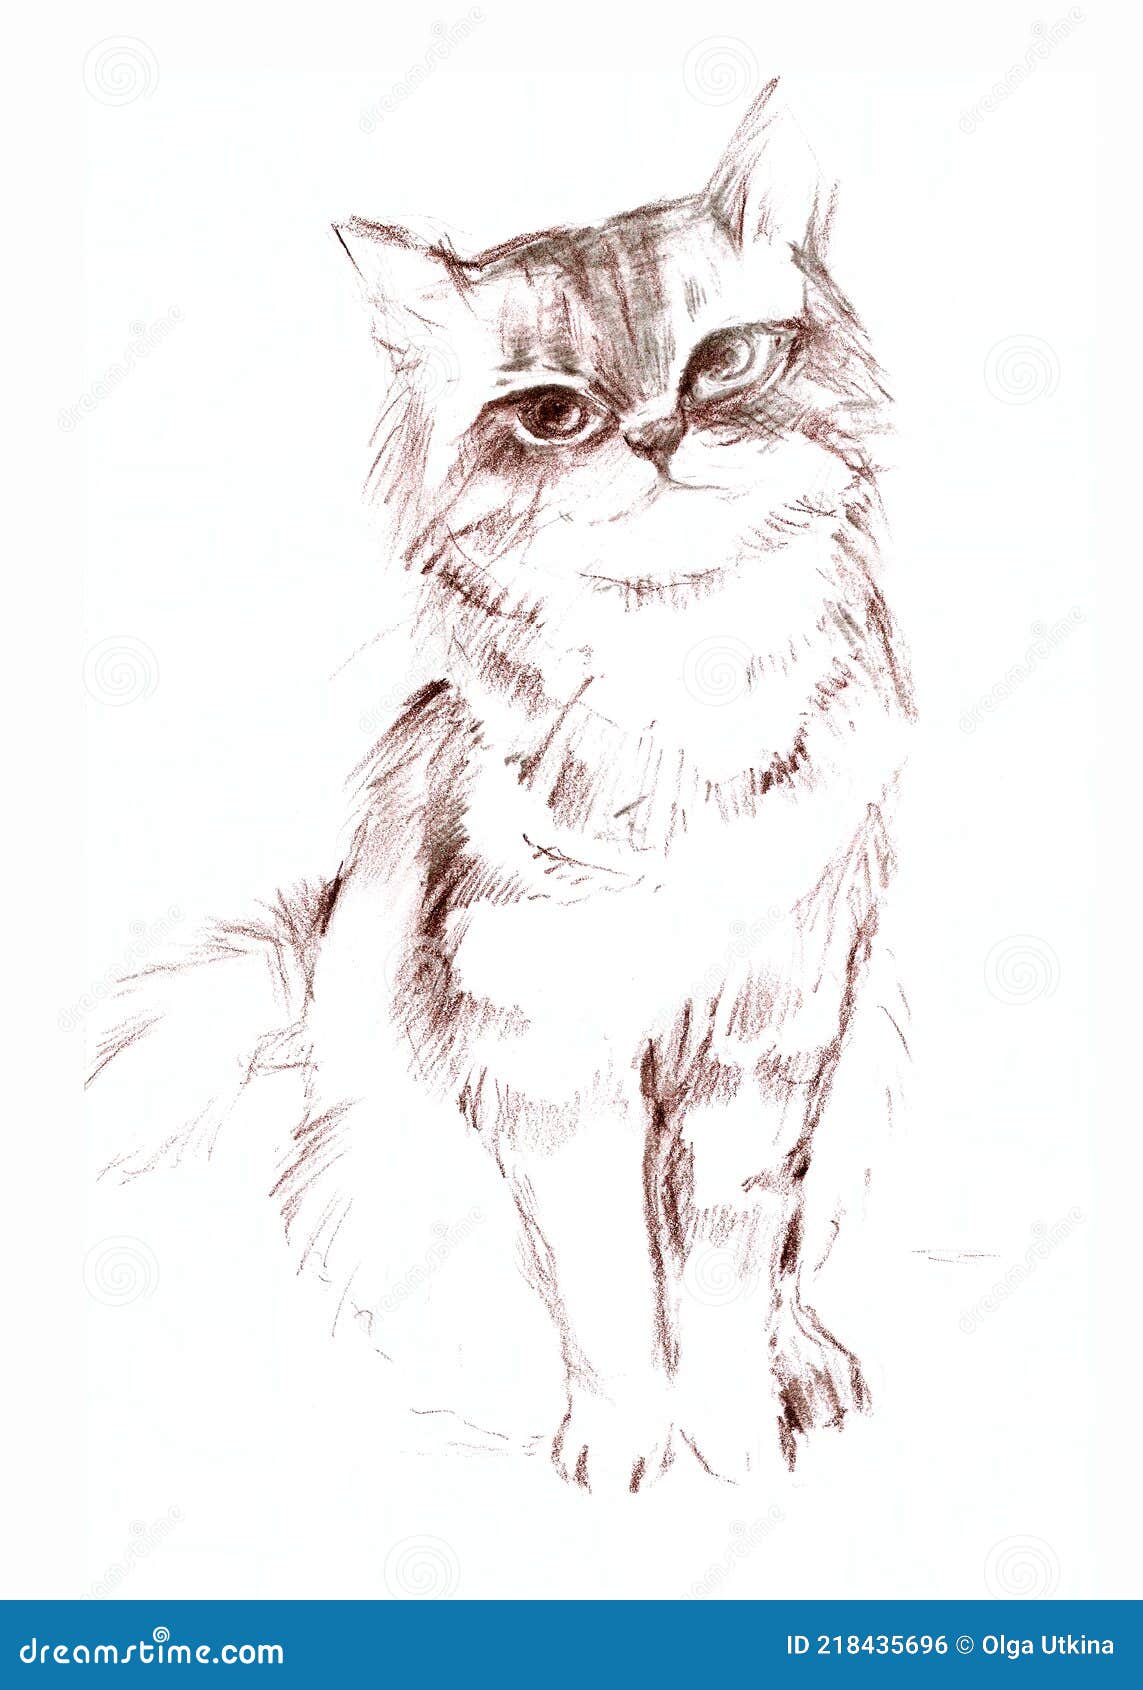 Hand Drawn Illustration of Domestic Animal, Cute Fluffy Kitty of Single  Colour Design Stock Illustration - Illustration of sketching, kitten:  218435696